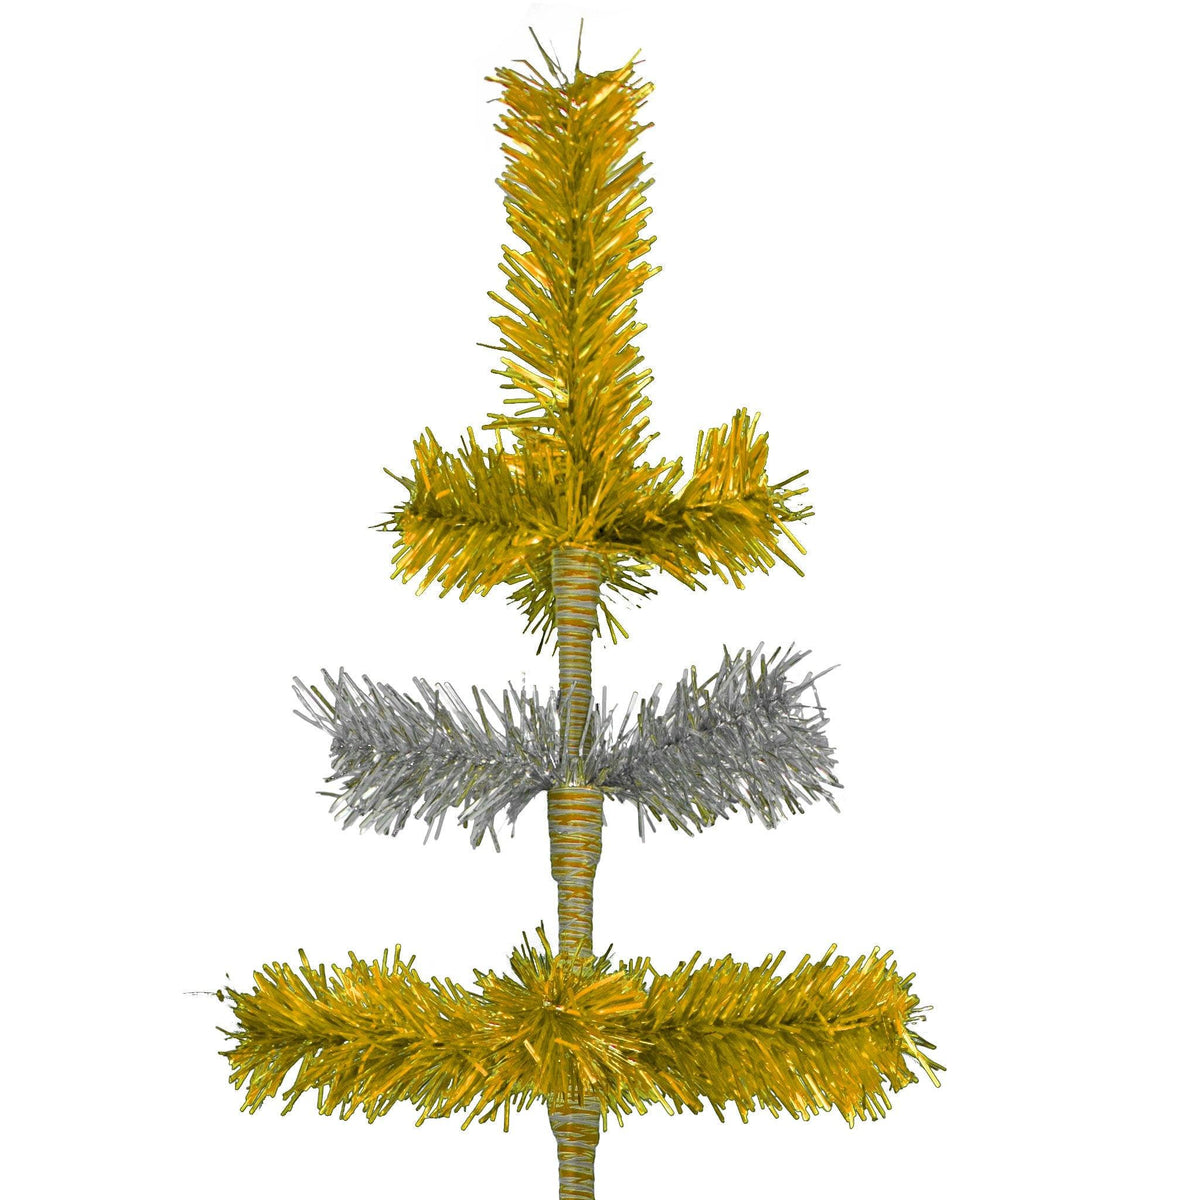 48in tall Shiny Gold and Metallic Silver Layered Tinsel Christmas Trees on sale at leedisplay.com